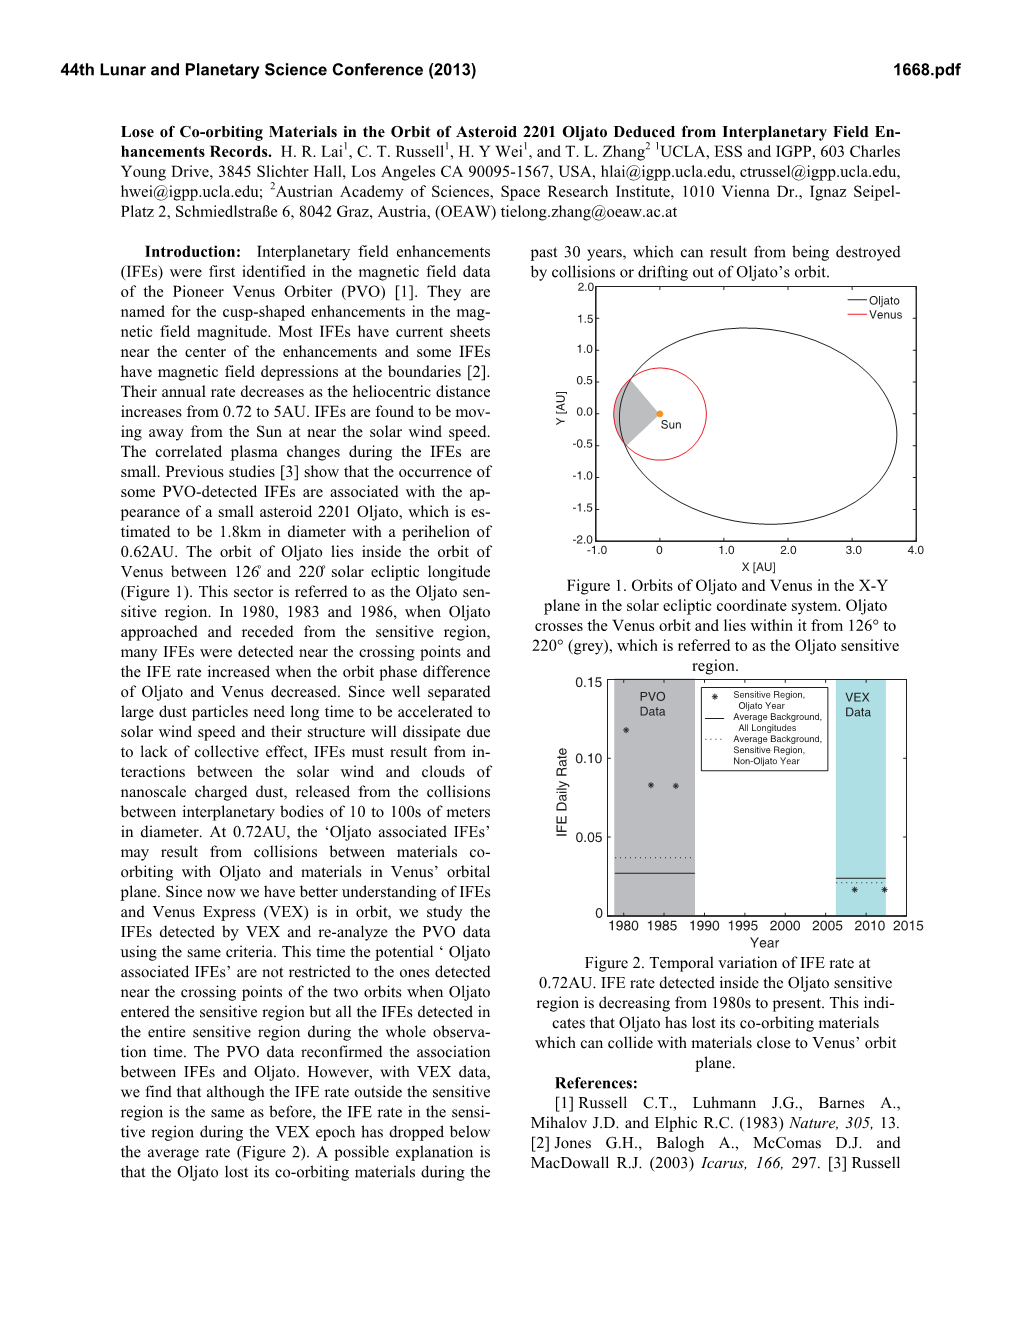 Lose of Co-Orbiting Materials in the Orbit of Asteroid 2201 Oljato Deduced from Interplanetary Field En- Hancements Records